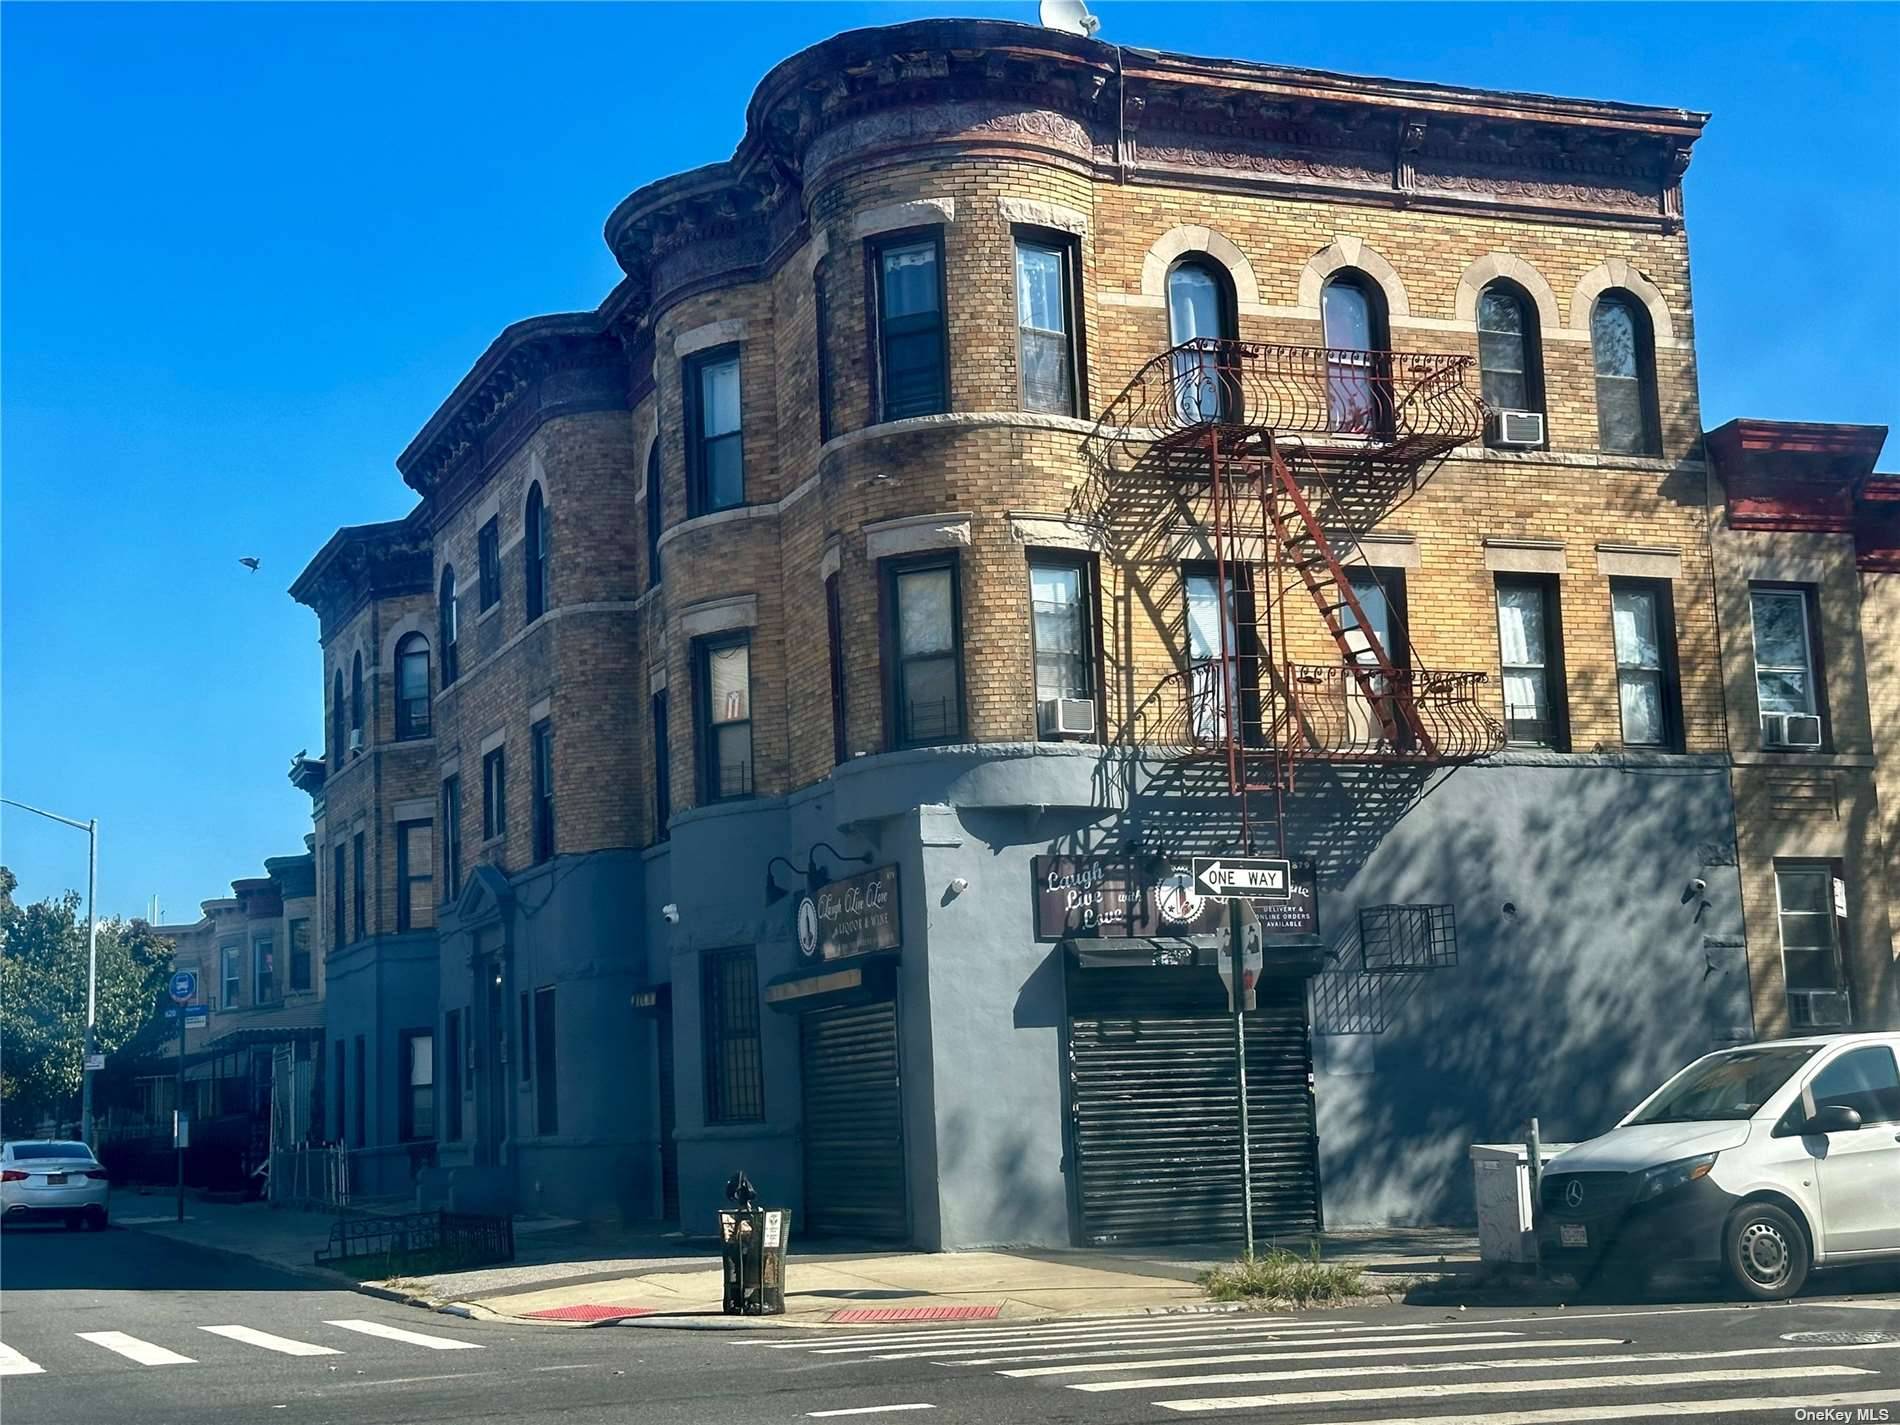 PRIME BUSHWICK INVESTMENT CORNER BRICK MIXED USE THREE STORY 10 UNITS ONE AND TWO SPACIOUS BEDROOMS BUILDING APARTMENTS PLUS STOREFRONT CURRENTLY BEING USED AS LIQUOR STORE.